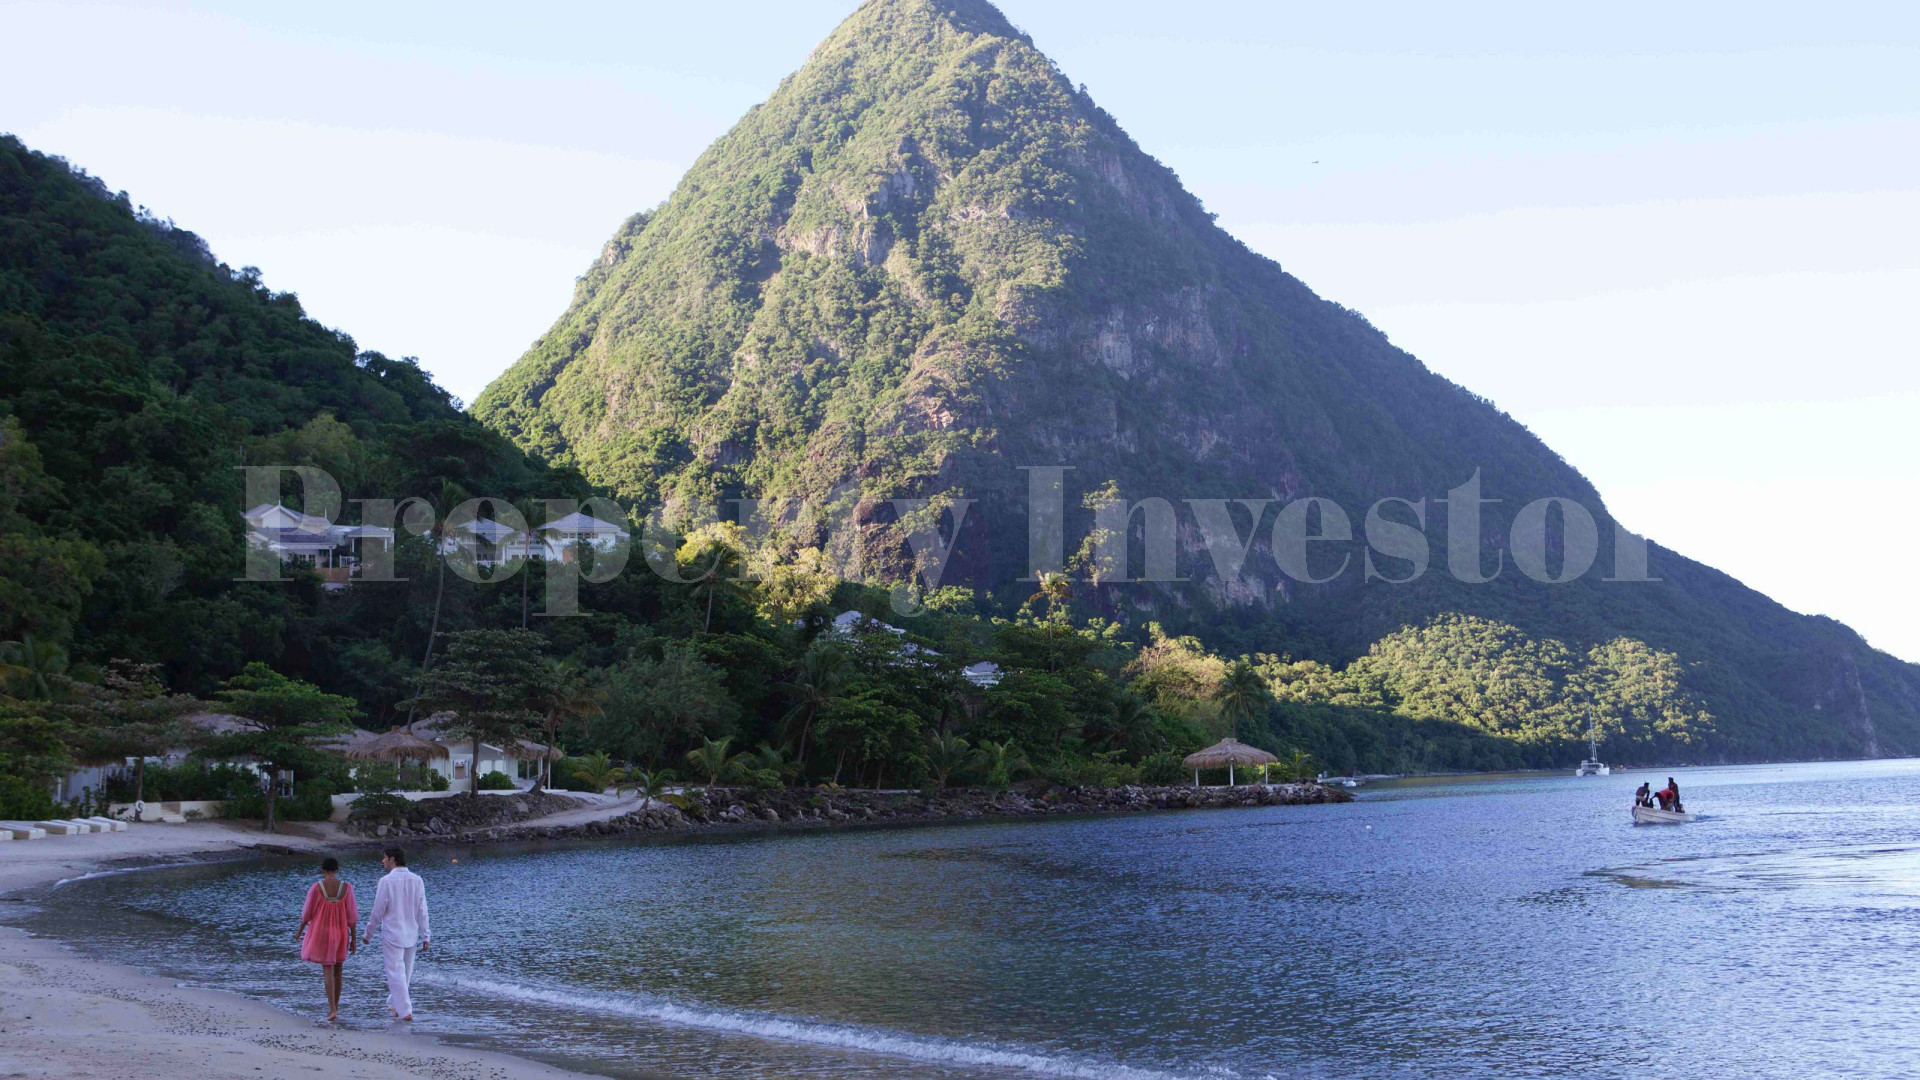 5 Bedroom Ultra-Luxury Beachfront Residence with Private Pier in Saint Lucia